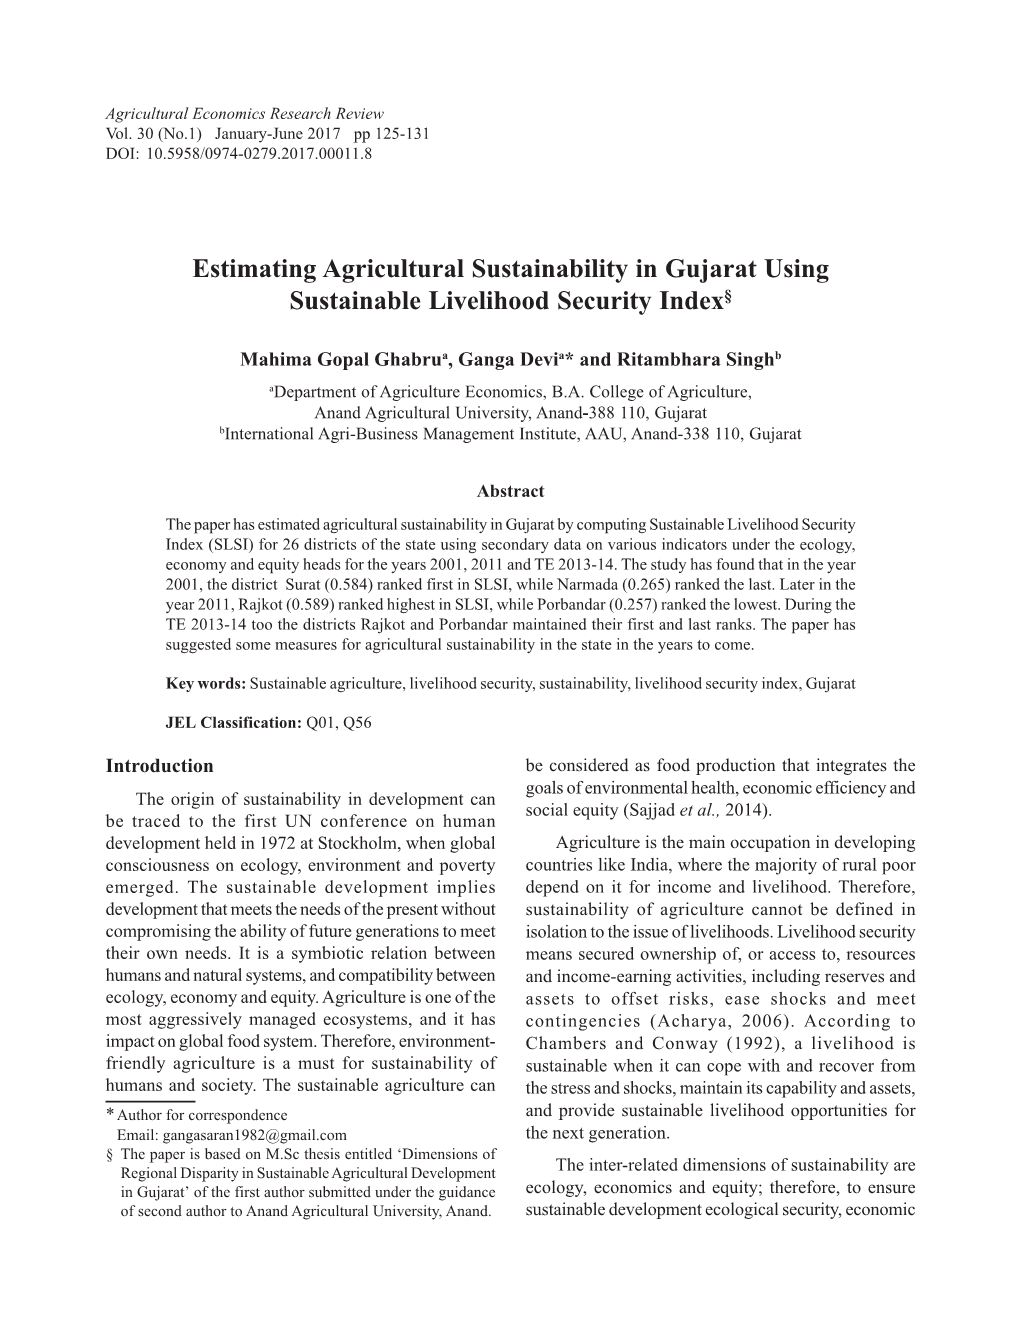 Estimating Agricultural Sustainability in Gujarat Using Sustainable Livelihood Security Index§